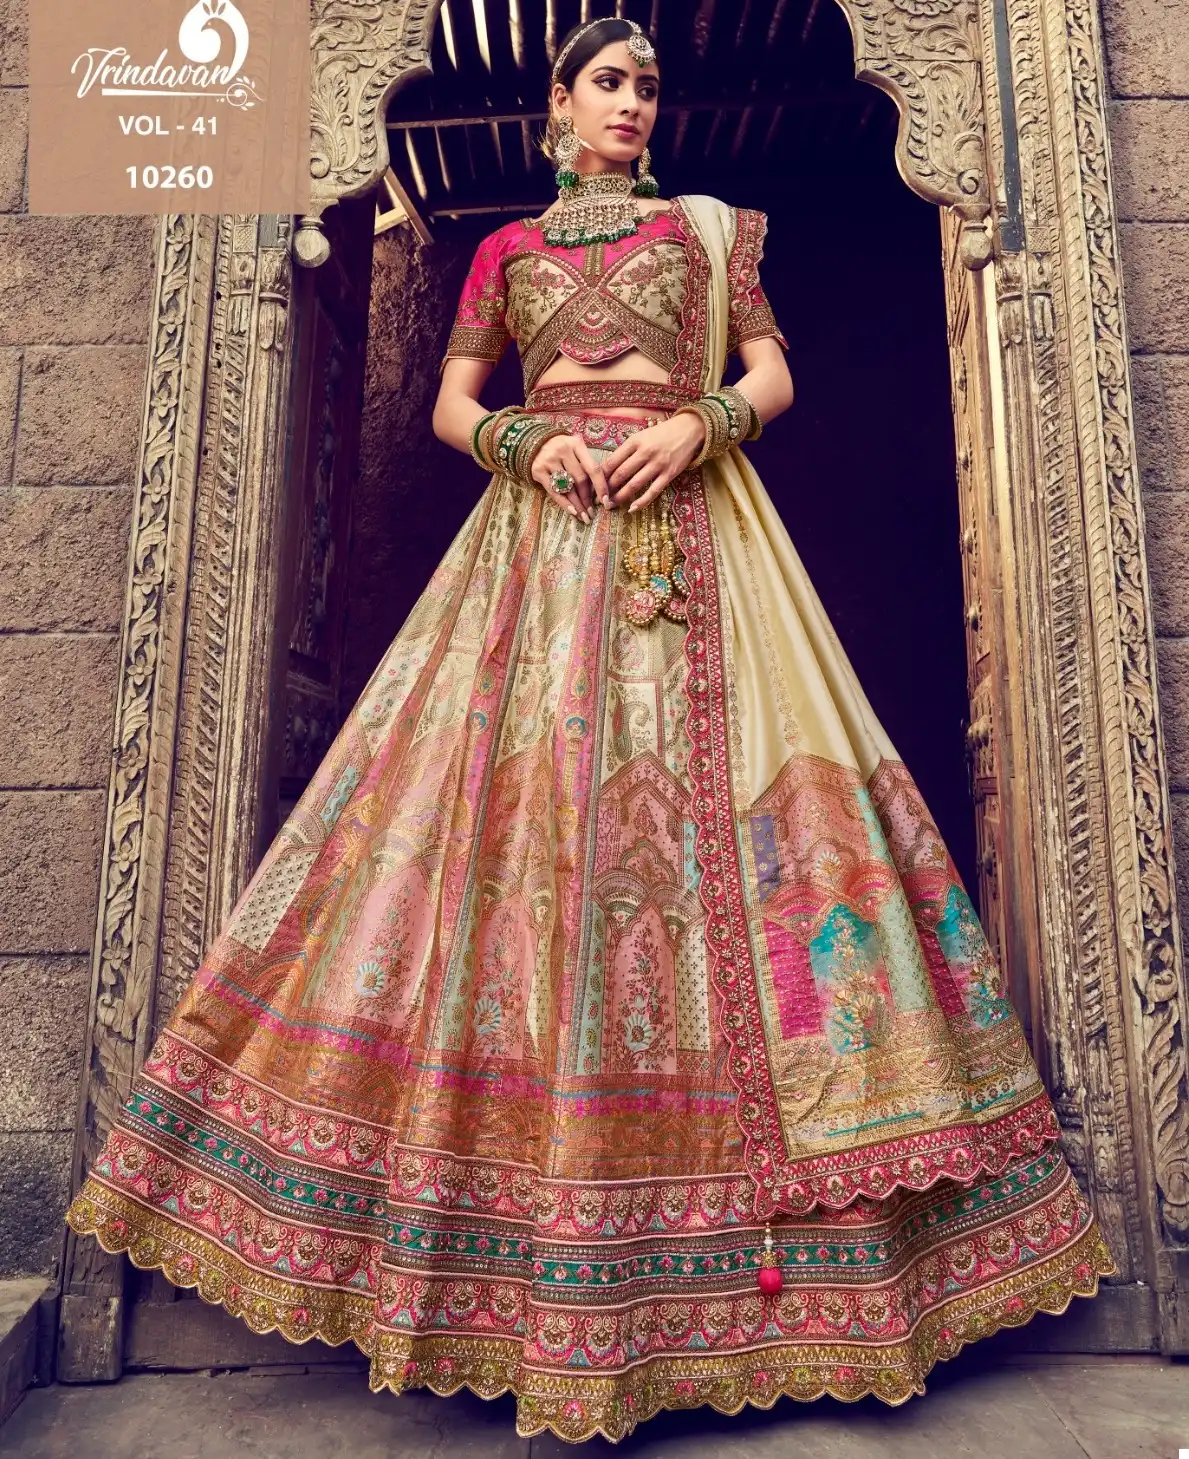 Stunning Wedding Lehengas Under Rs. 10,000 Every Bride-To-Be Will Fall In  Love With